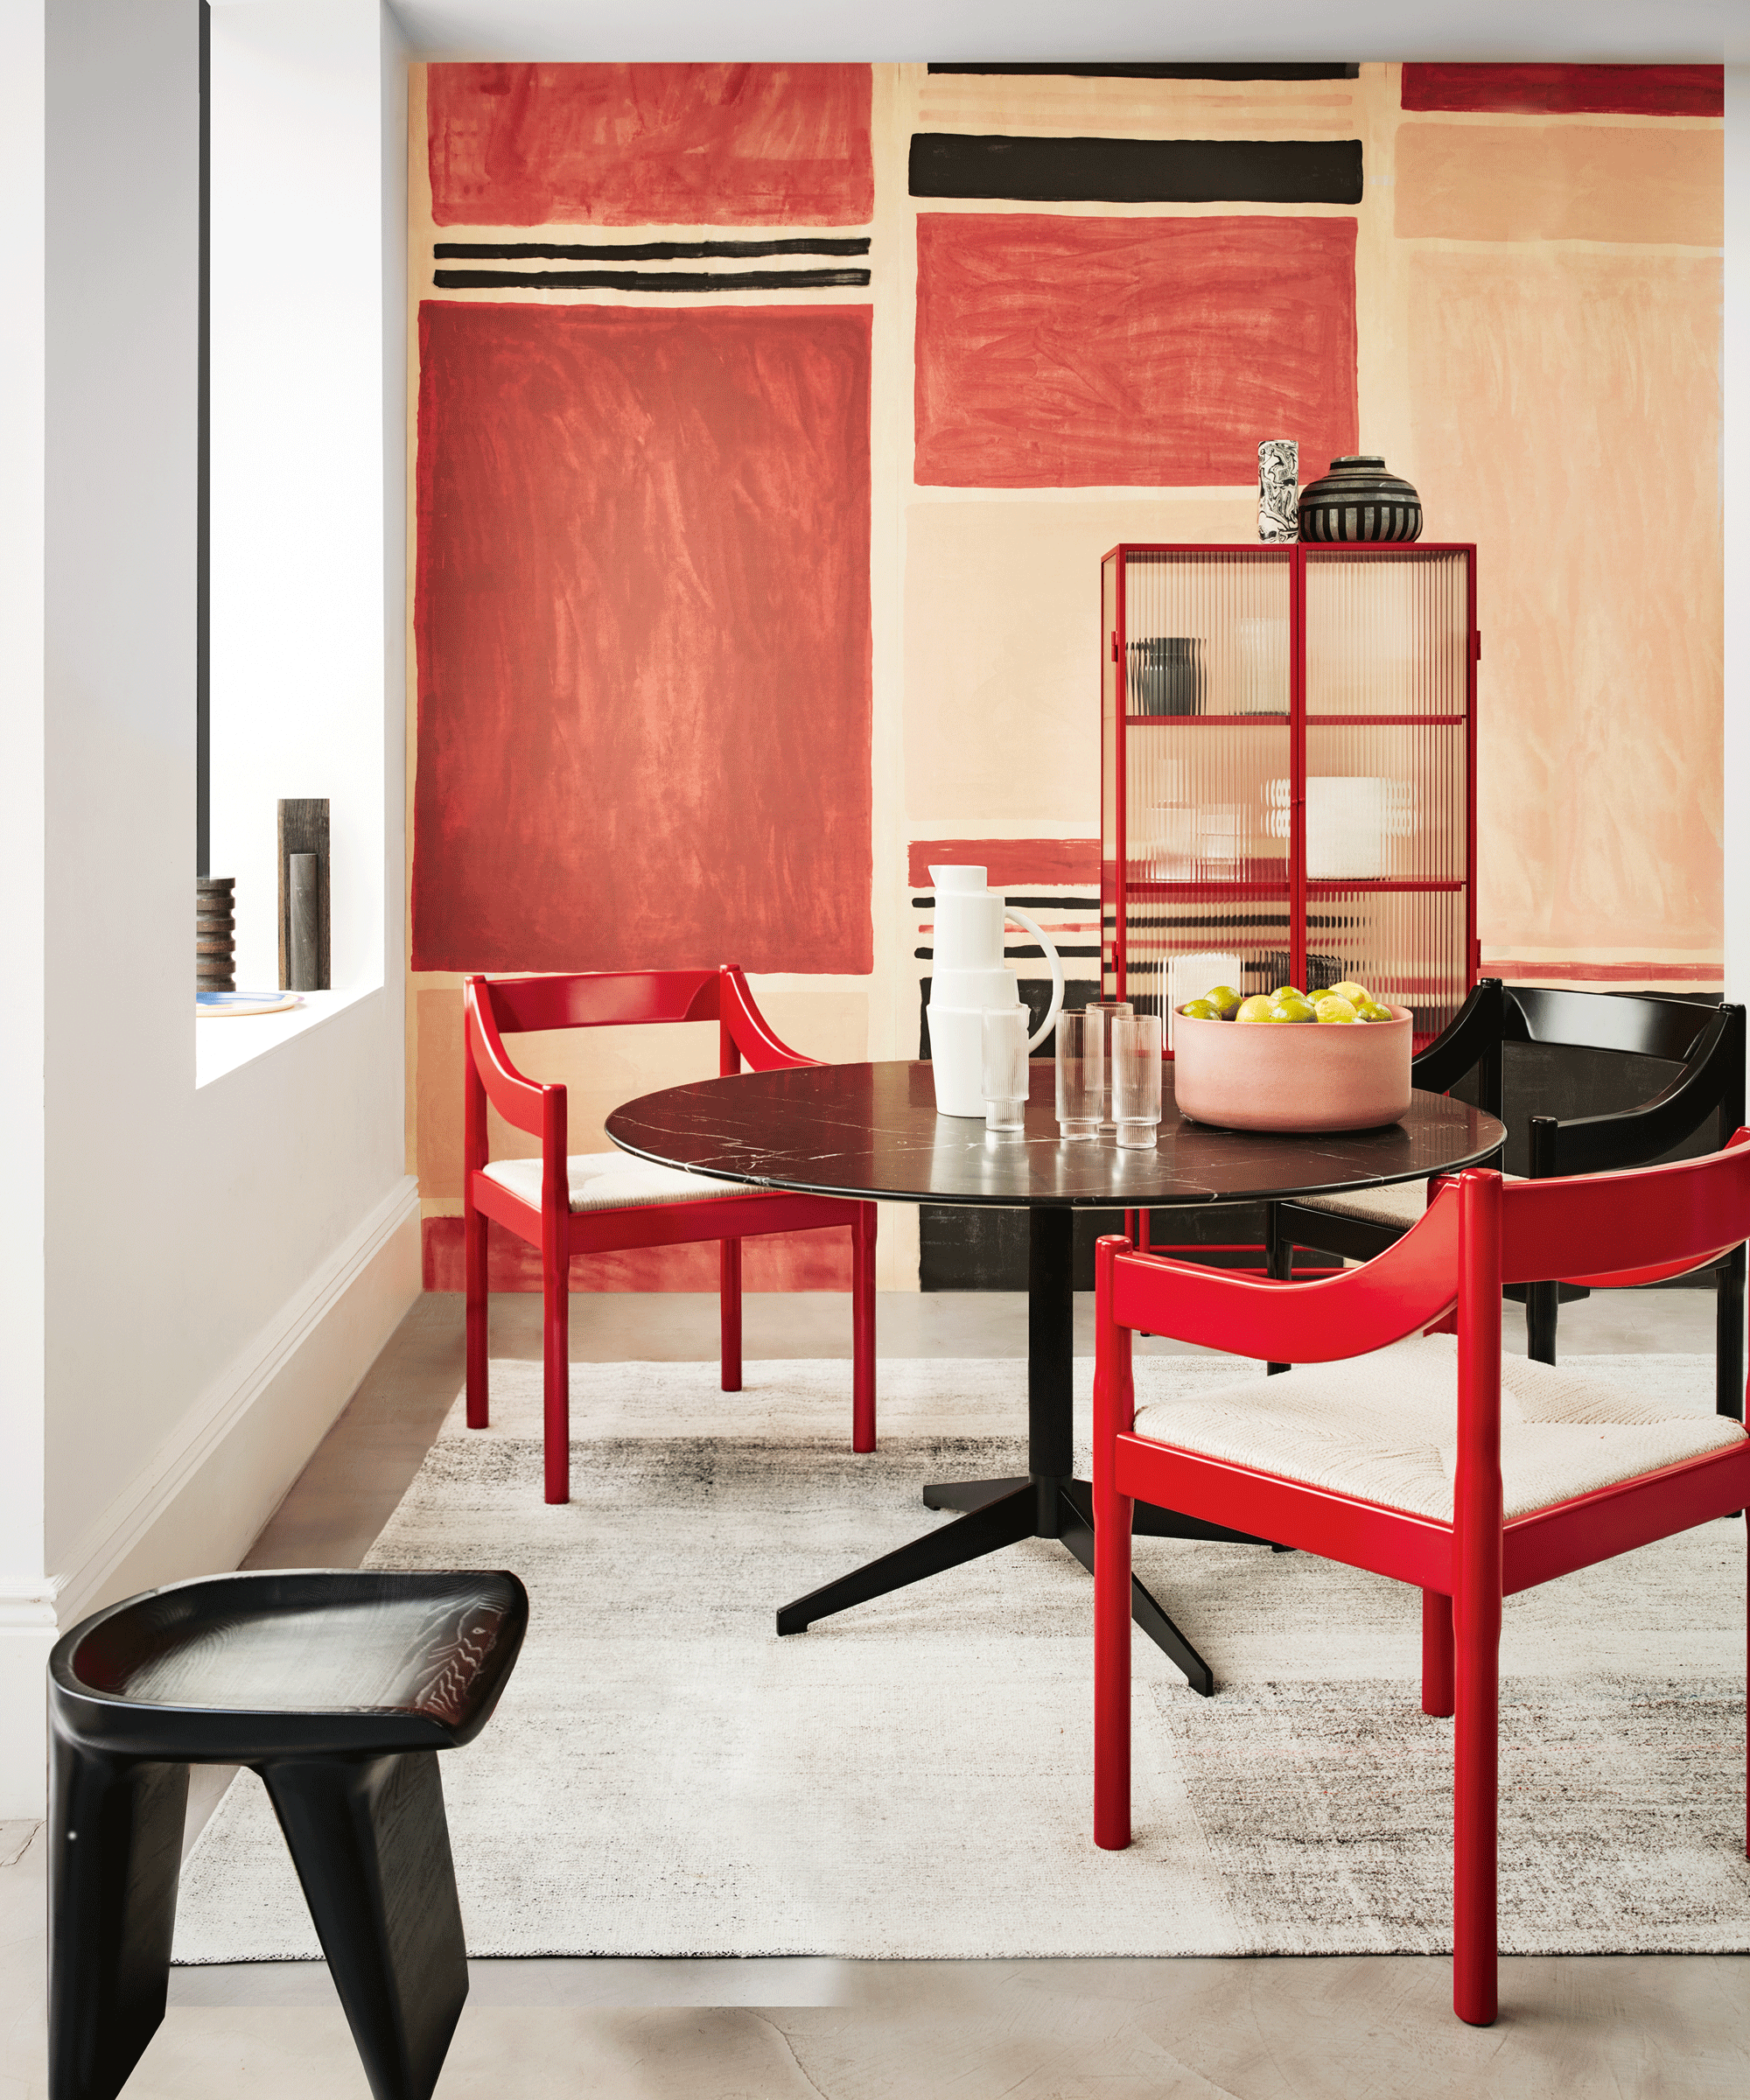 Dining area with red chairs and red wall